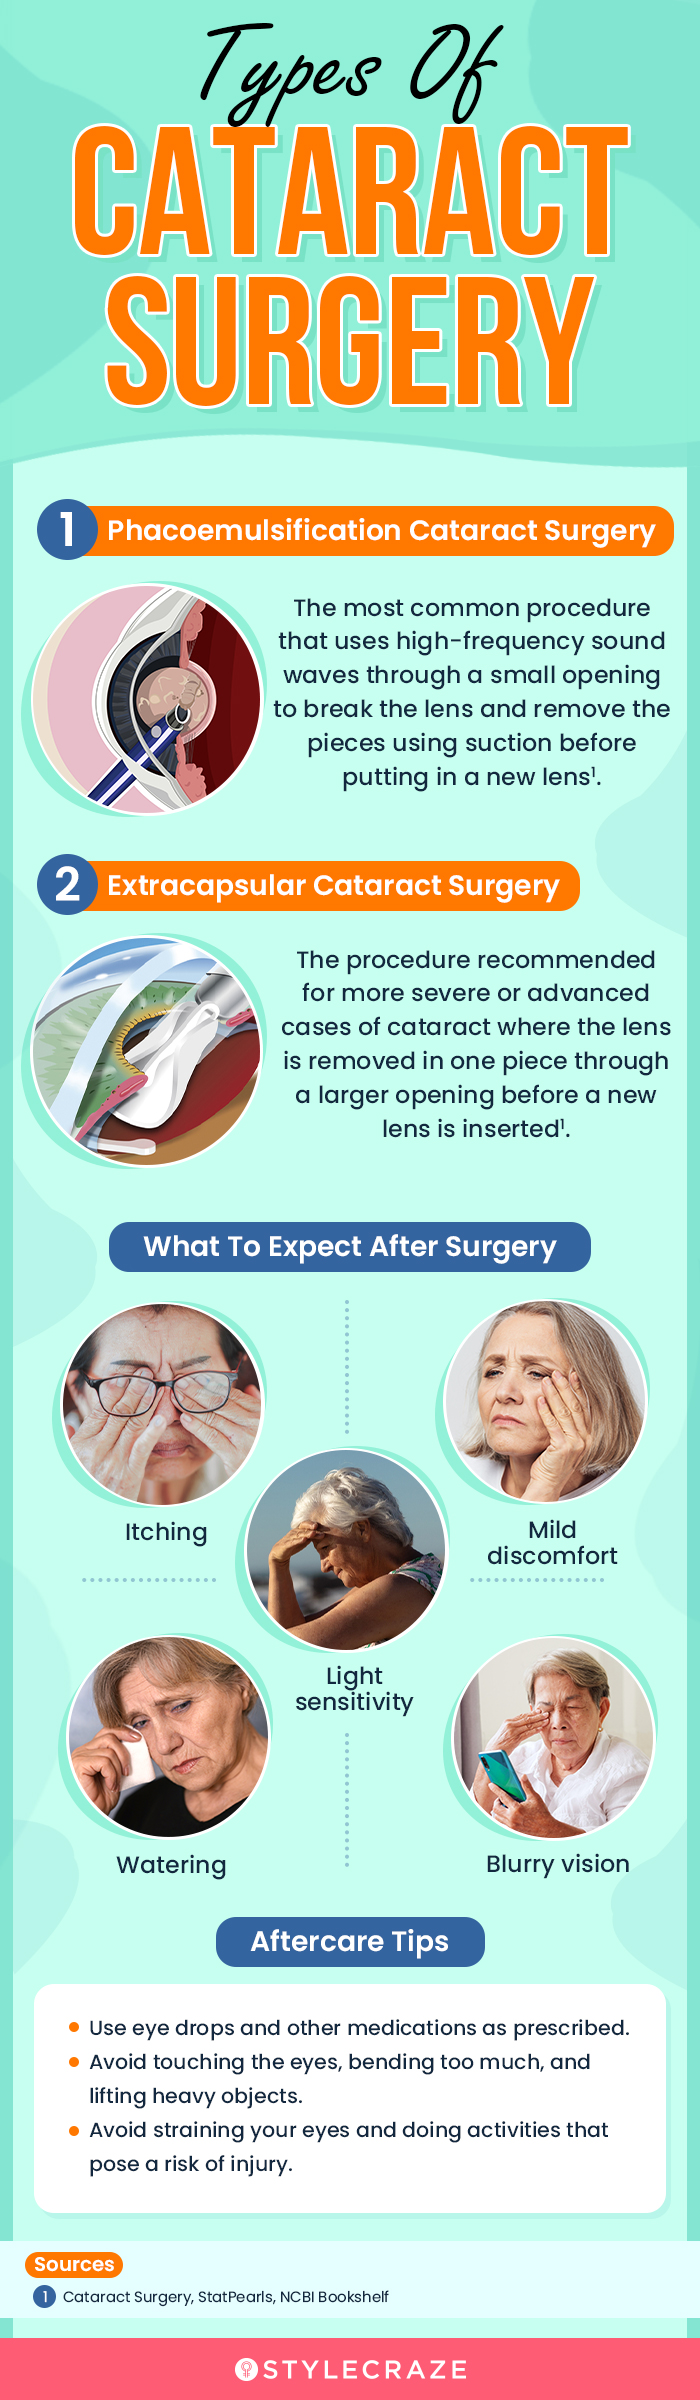 types of cataract surgery [infographic]